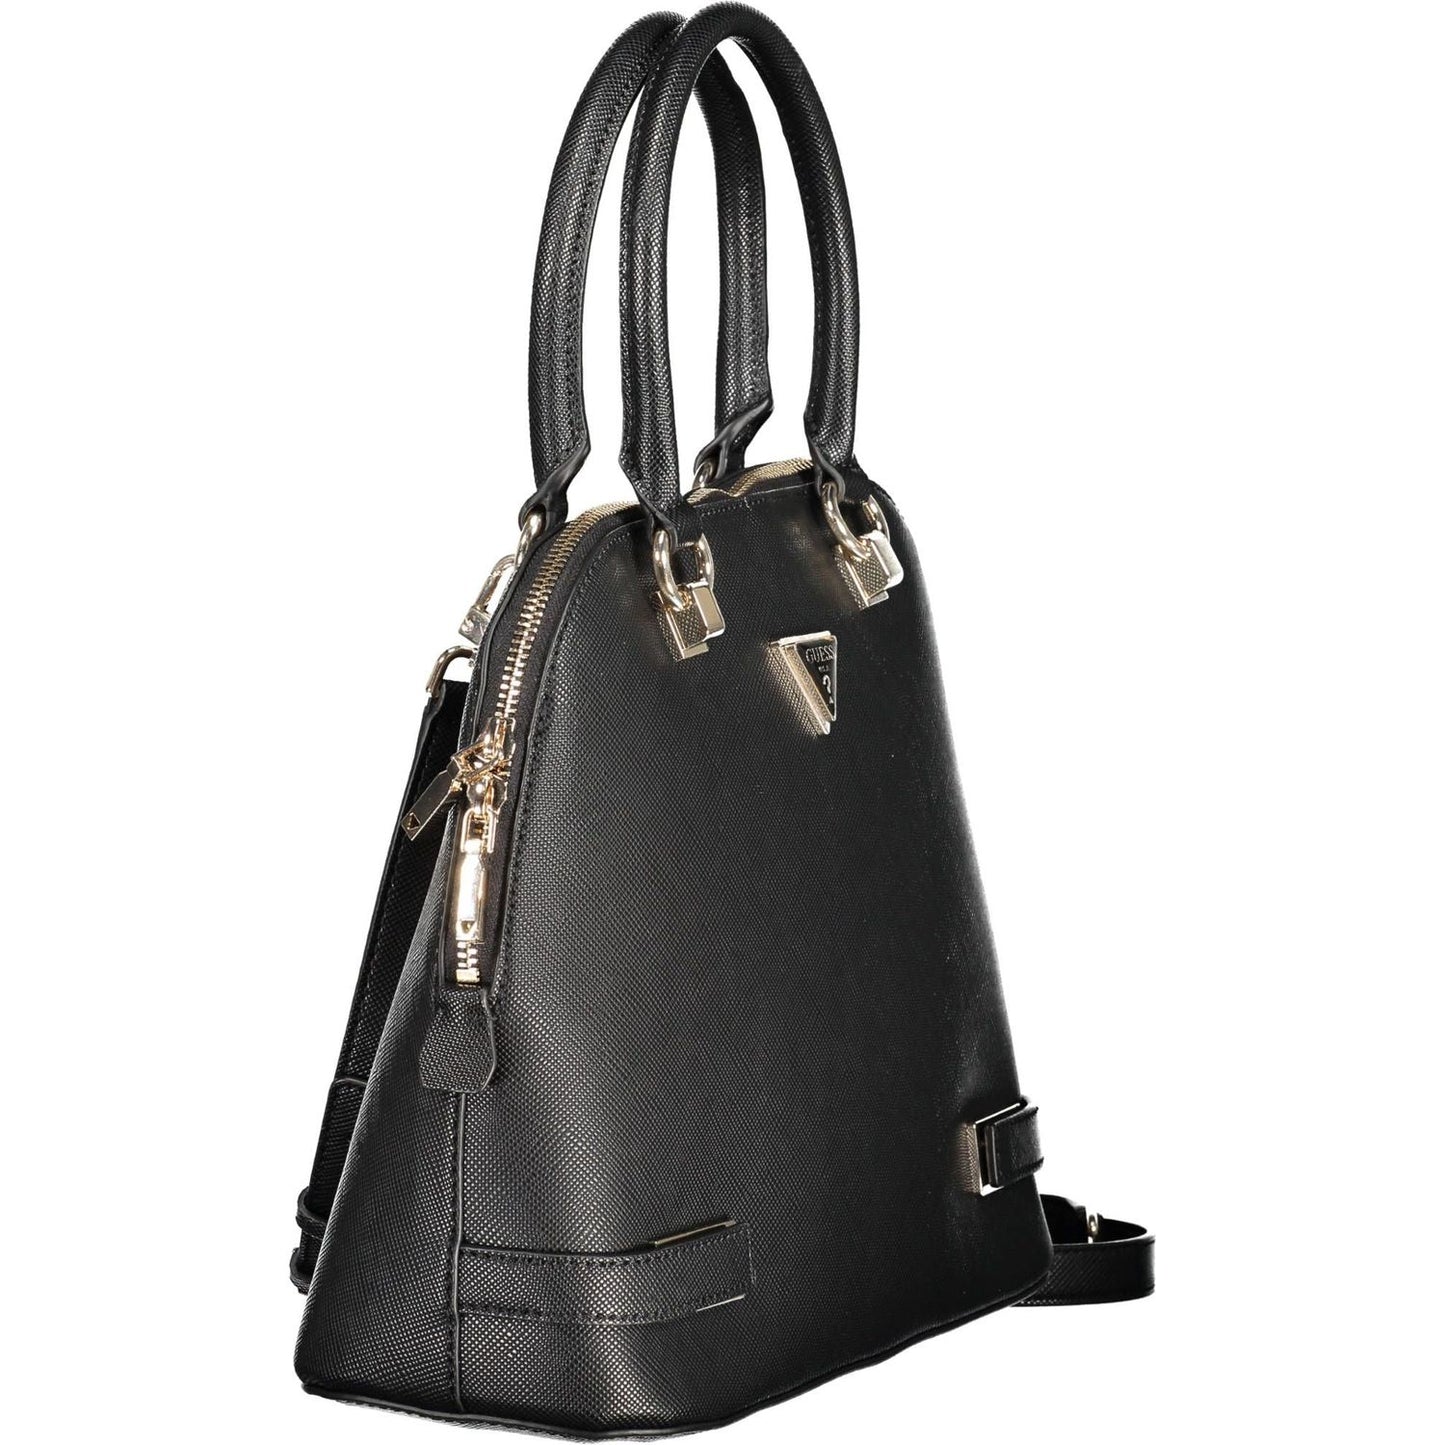 Guess Jeans Chic Black Guess Handbag with Contrasting Details chic-black-guess-handbag-with-contrasting-details